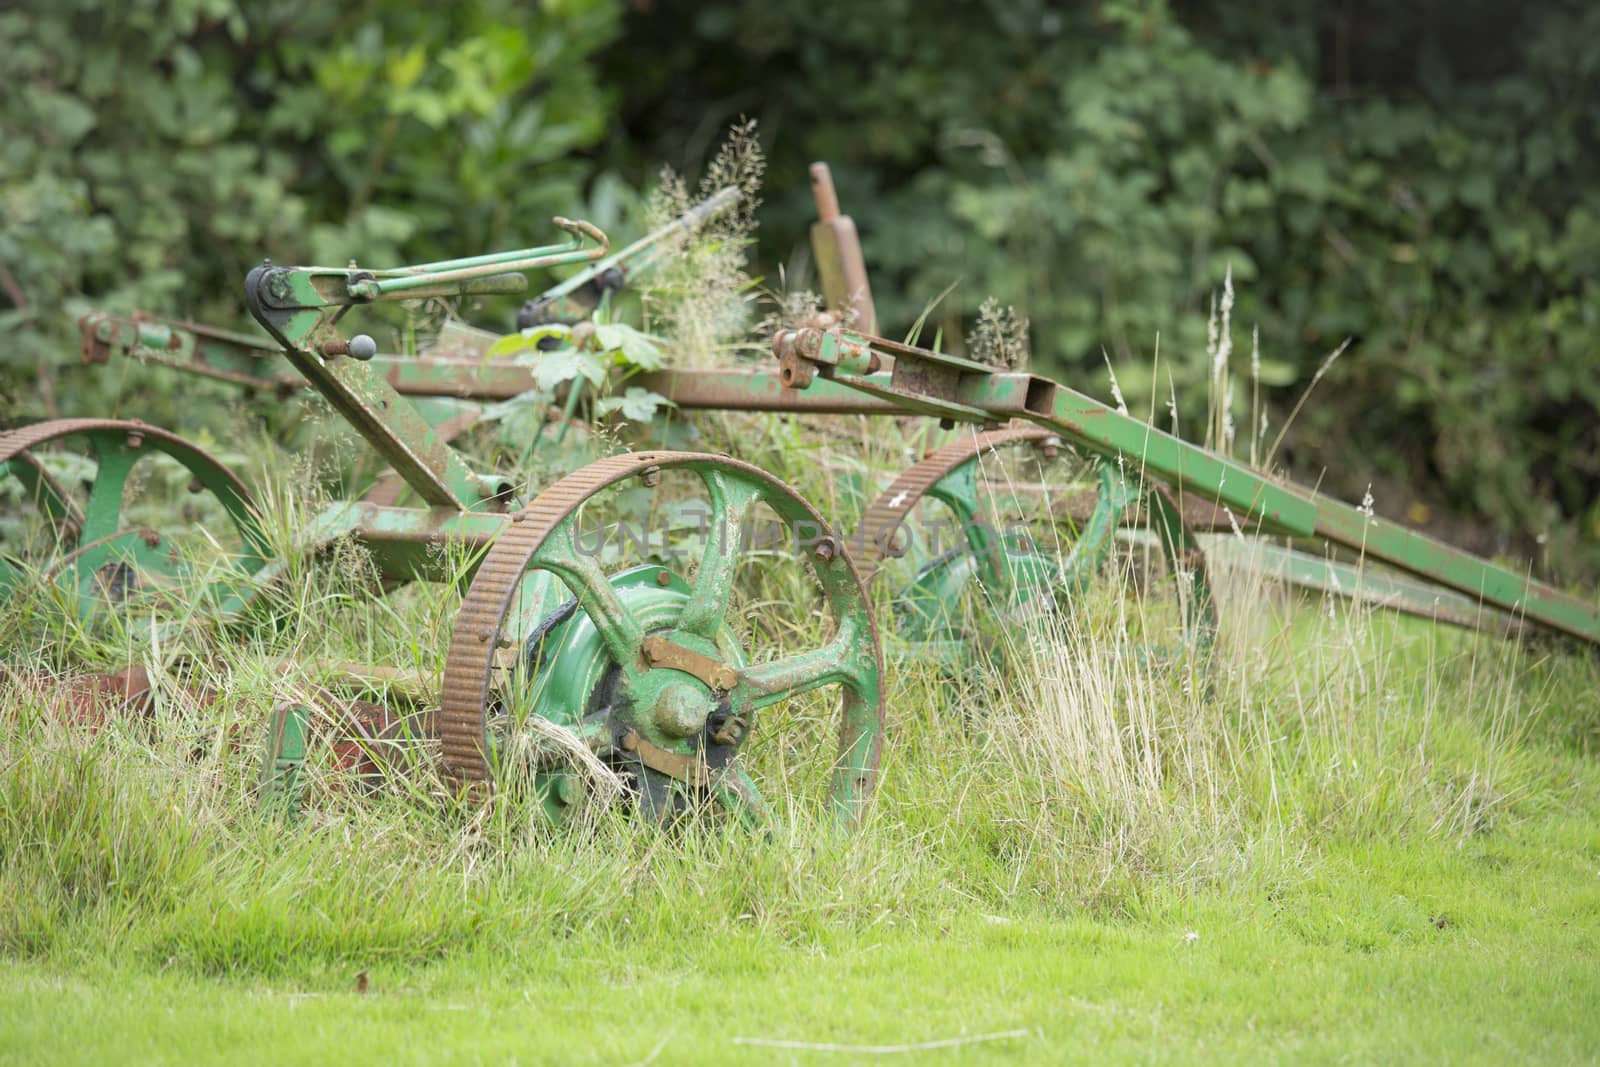 An old pull along Lawn Mower